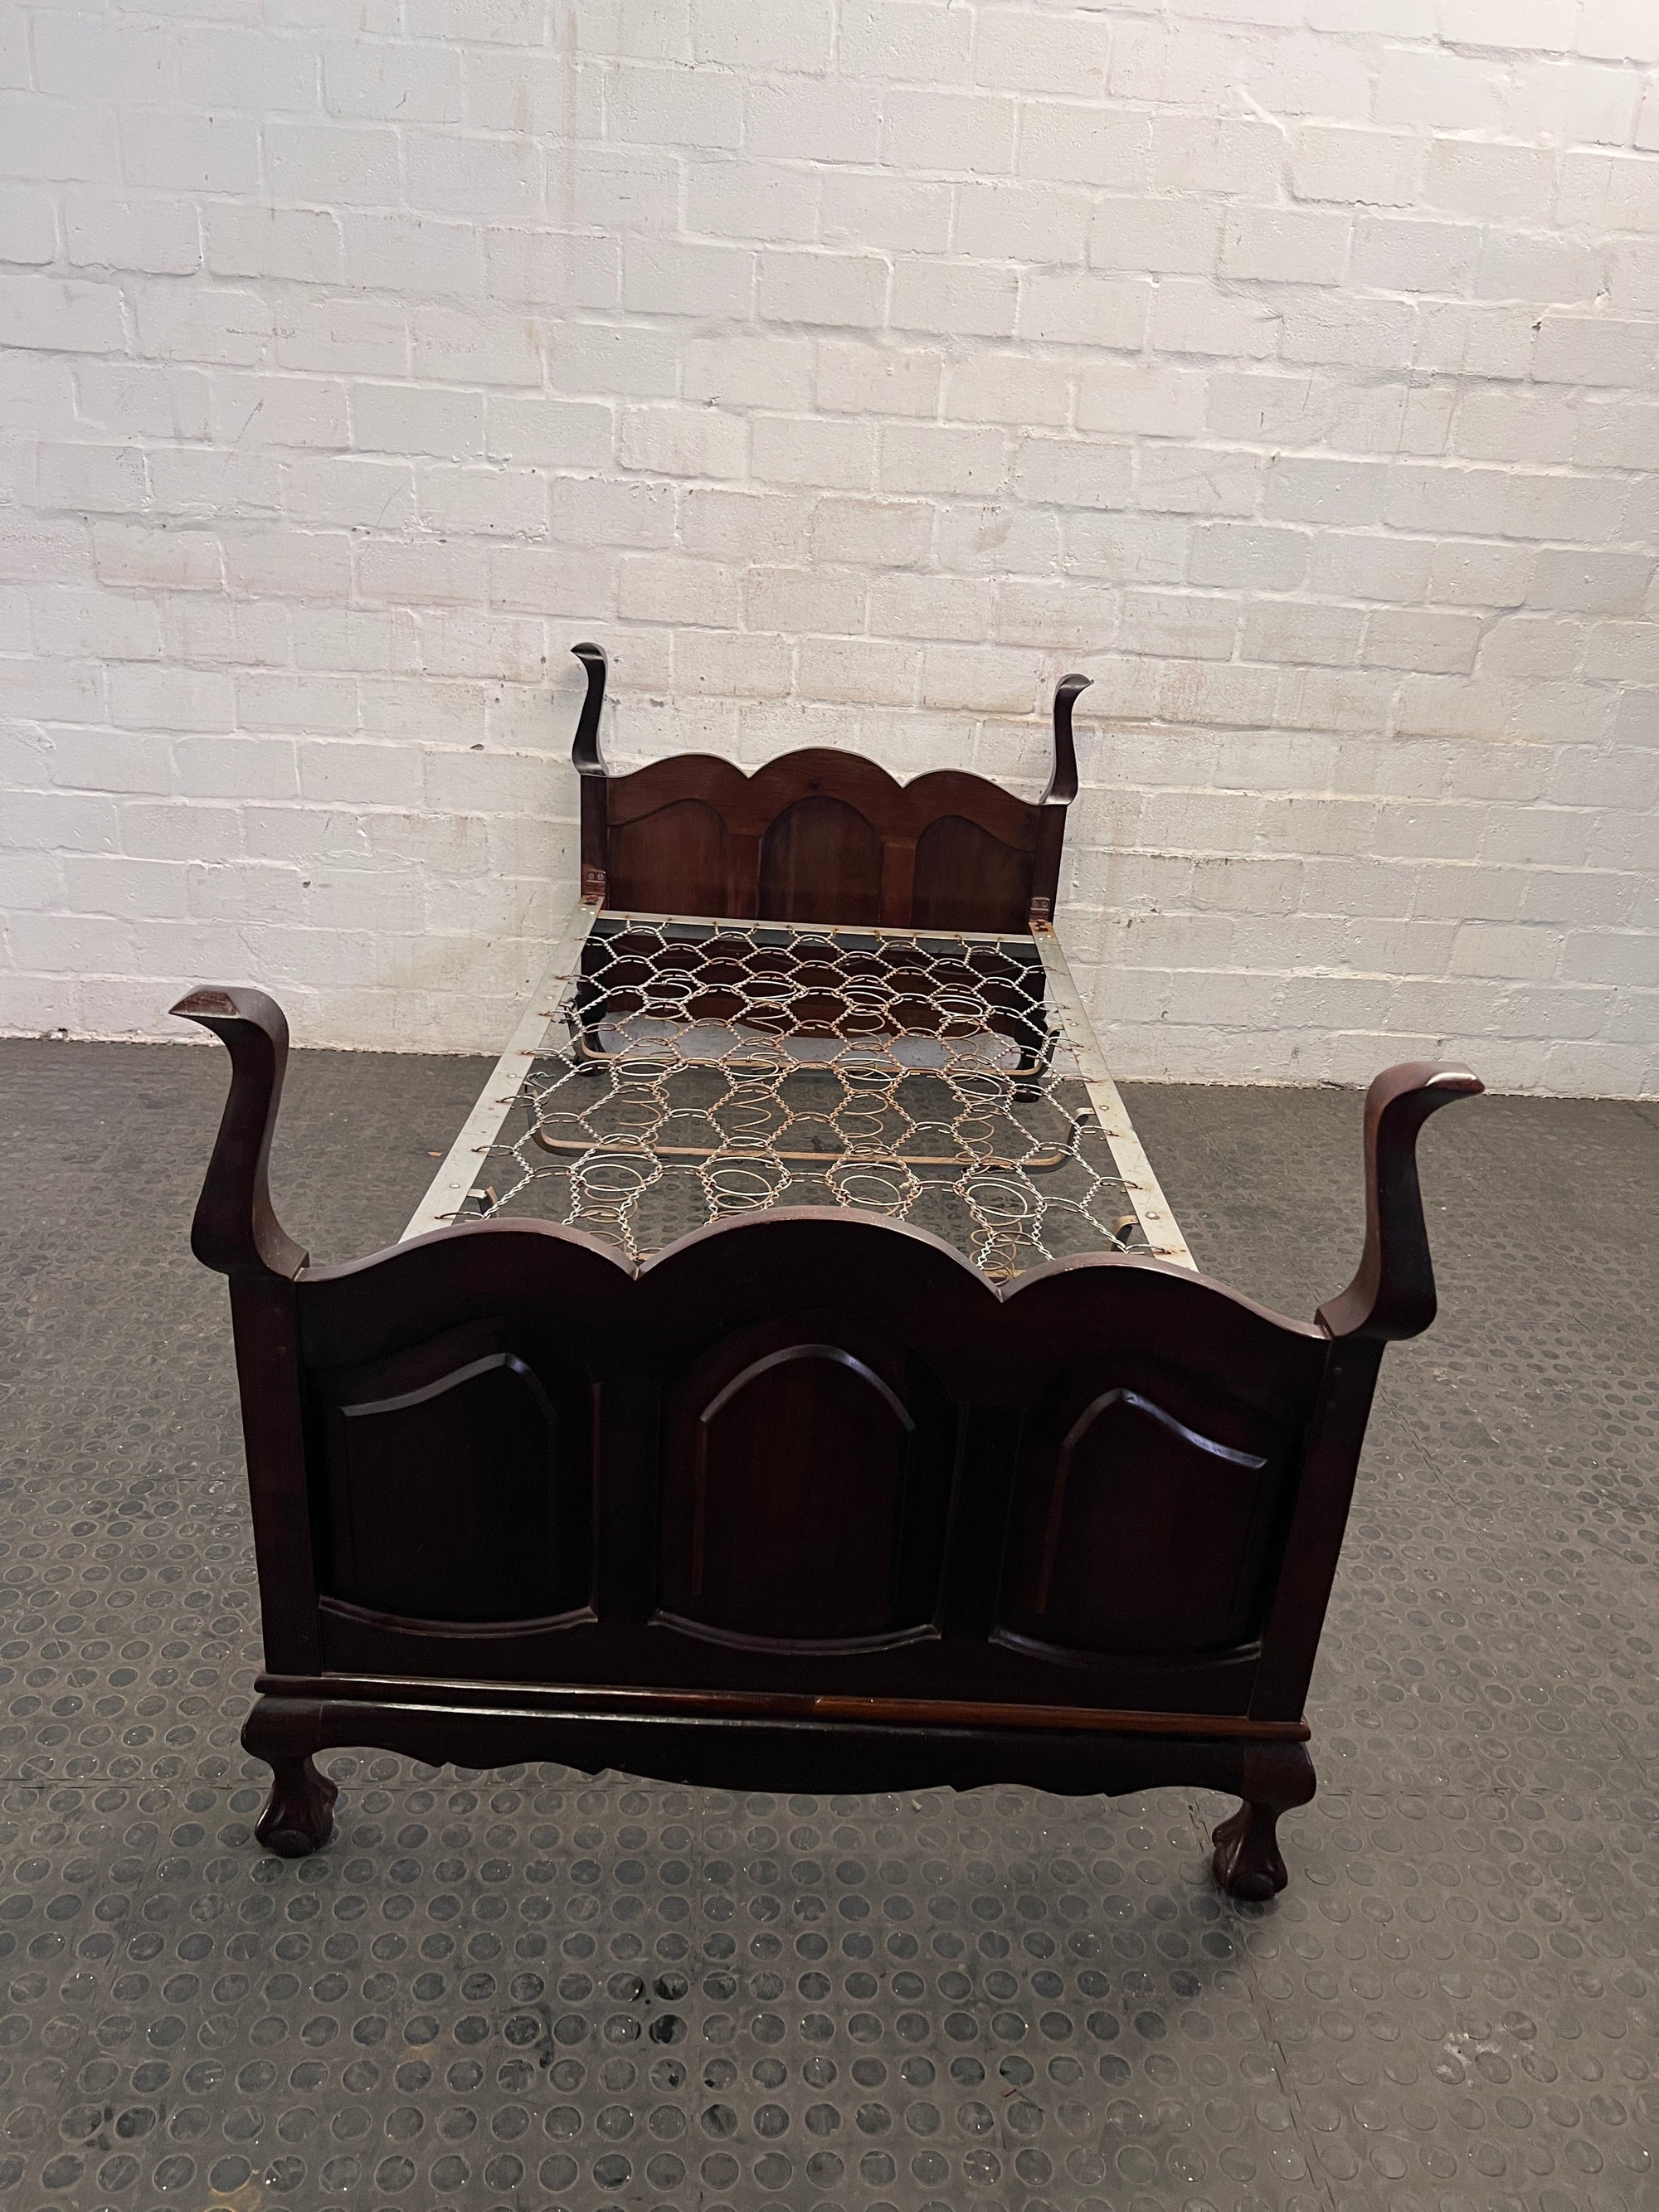 Metal Single Spring Bed Frame with Wooden Headboard and Footboard - REDUCED